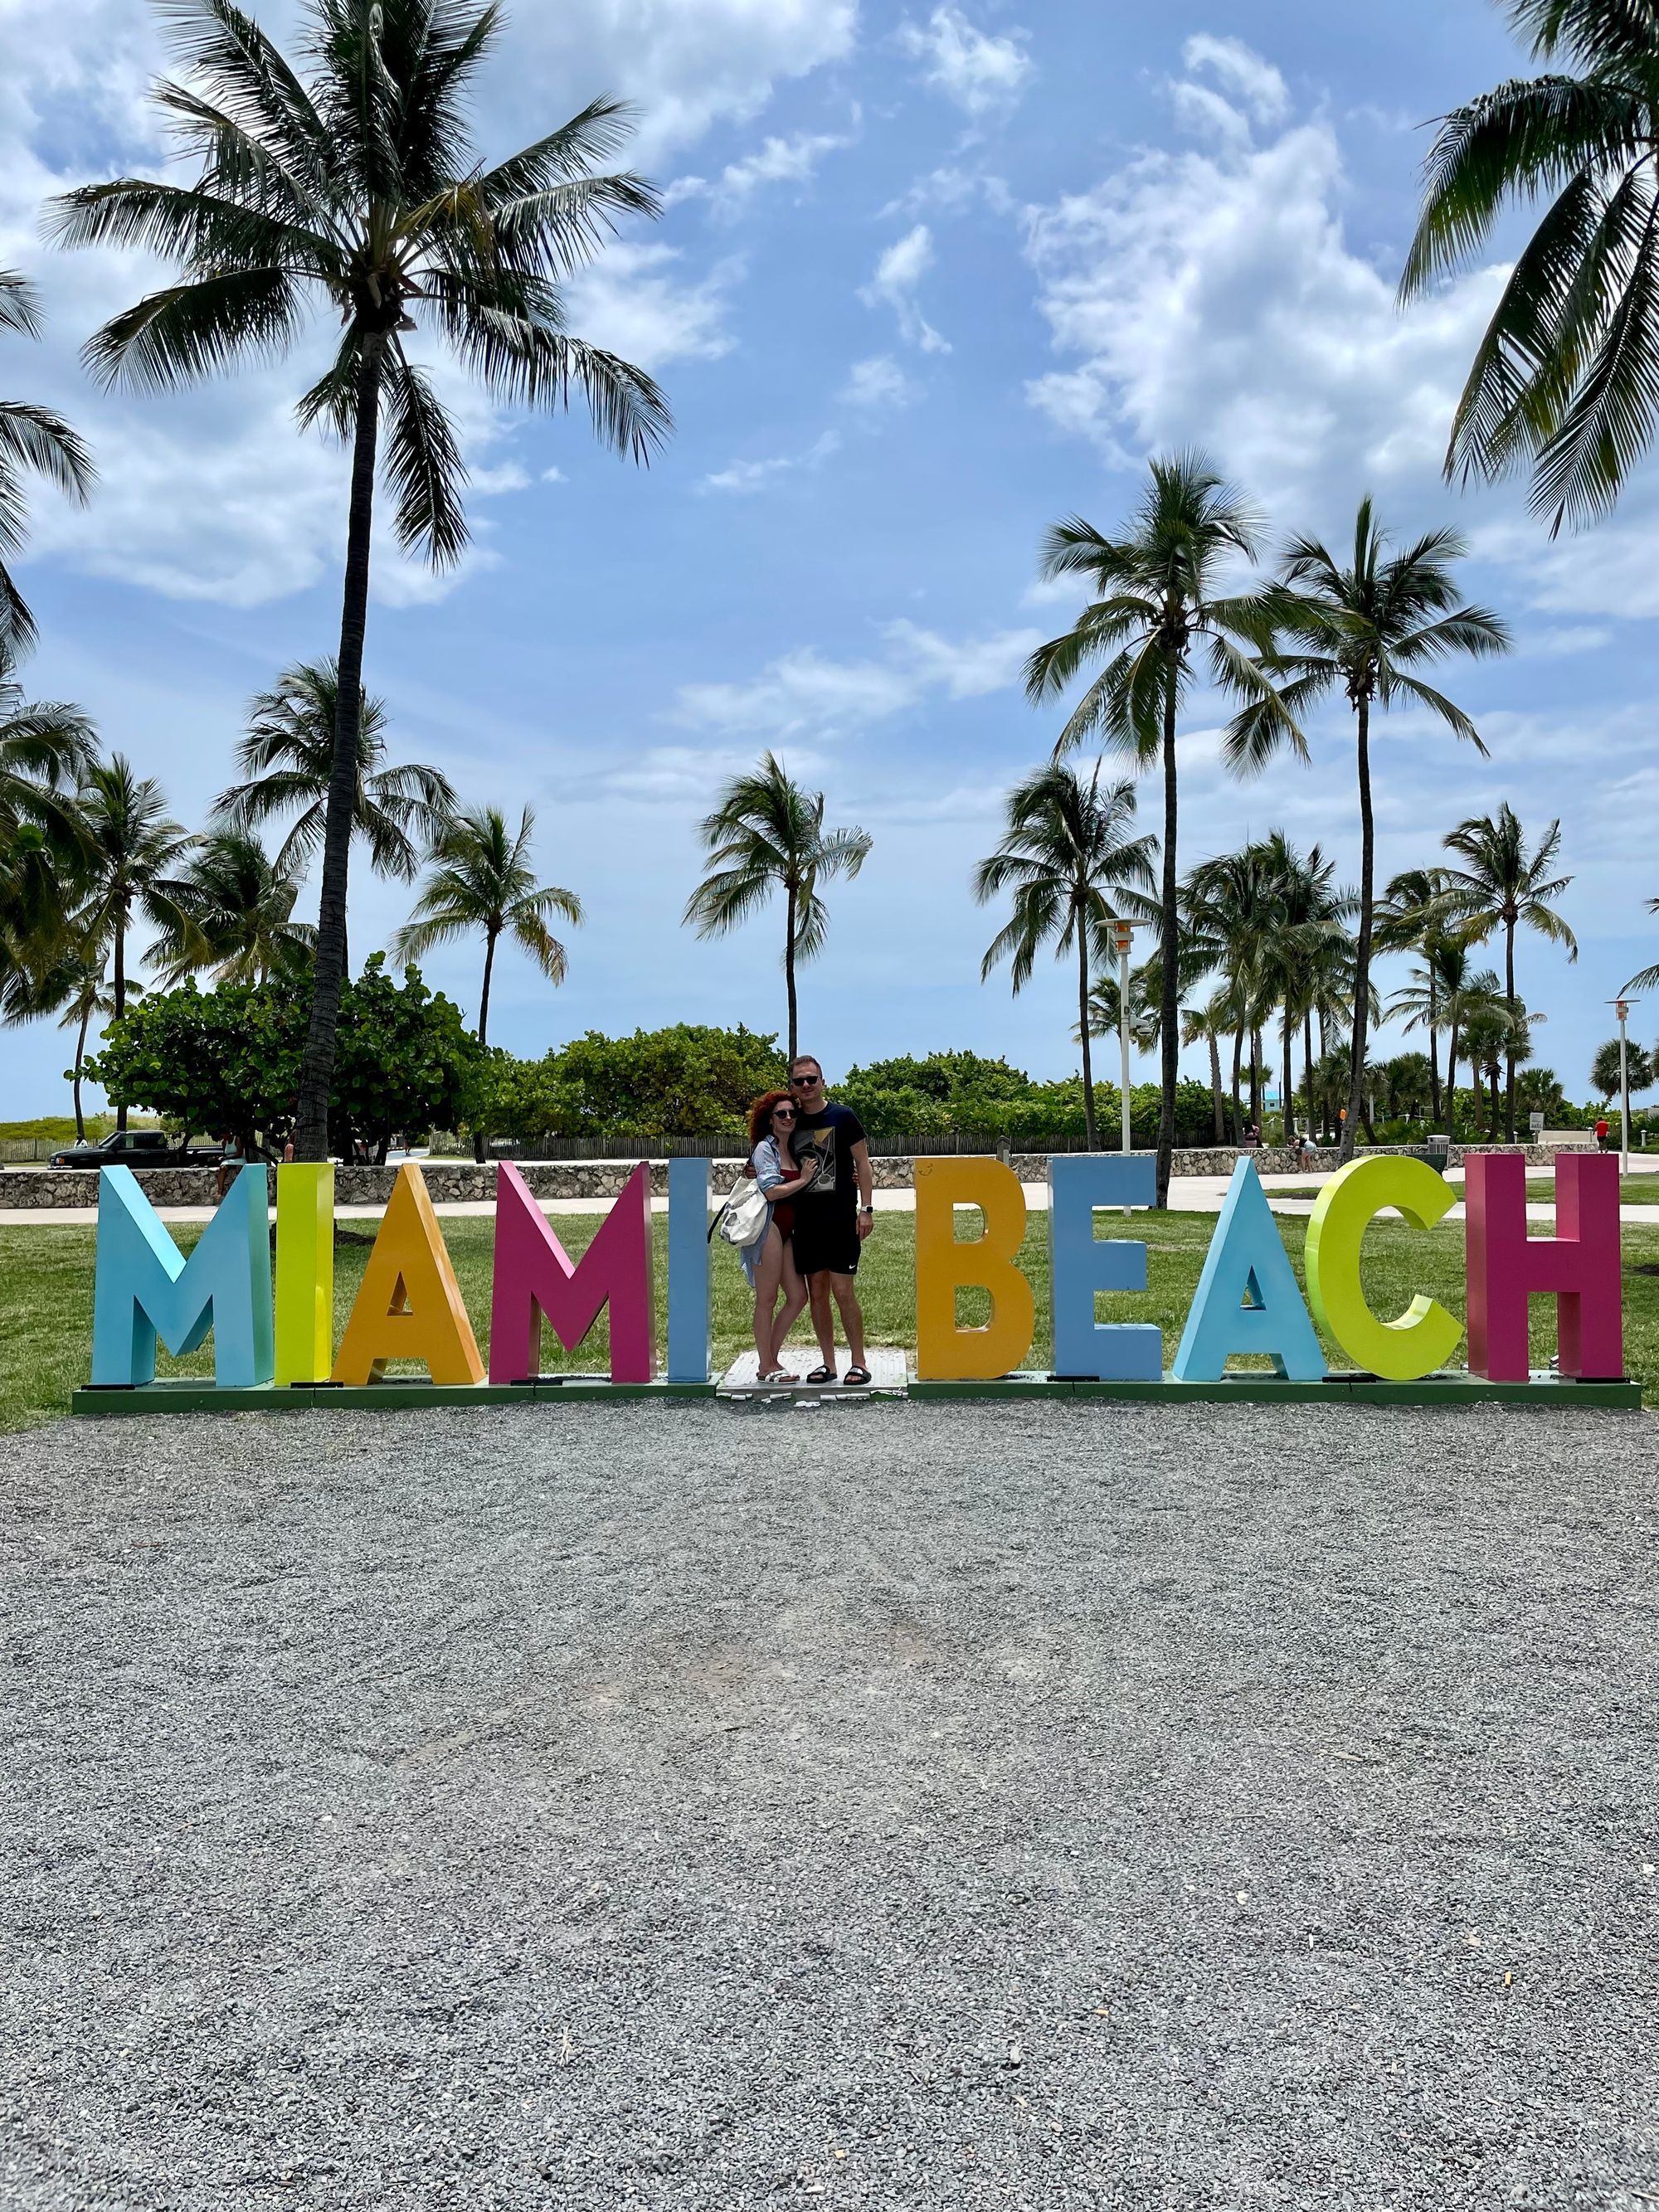 Our short, but fabulous trip to Miami